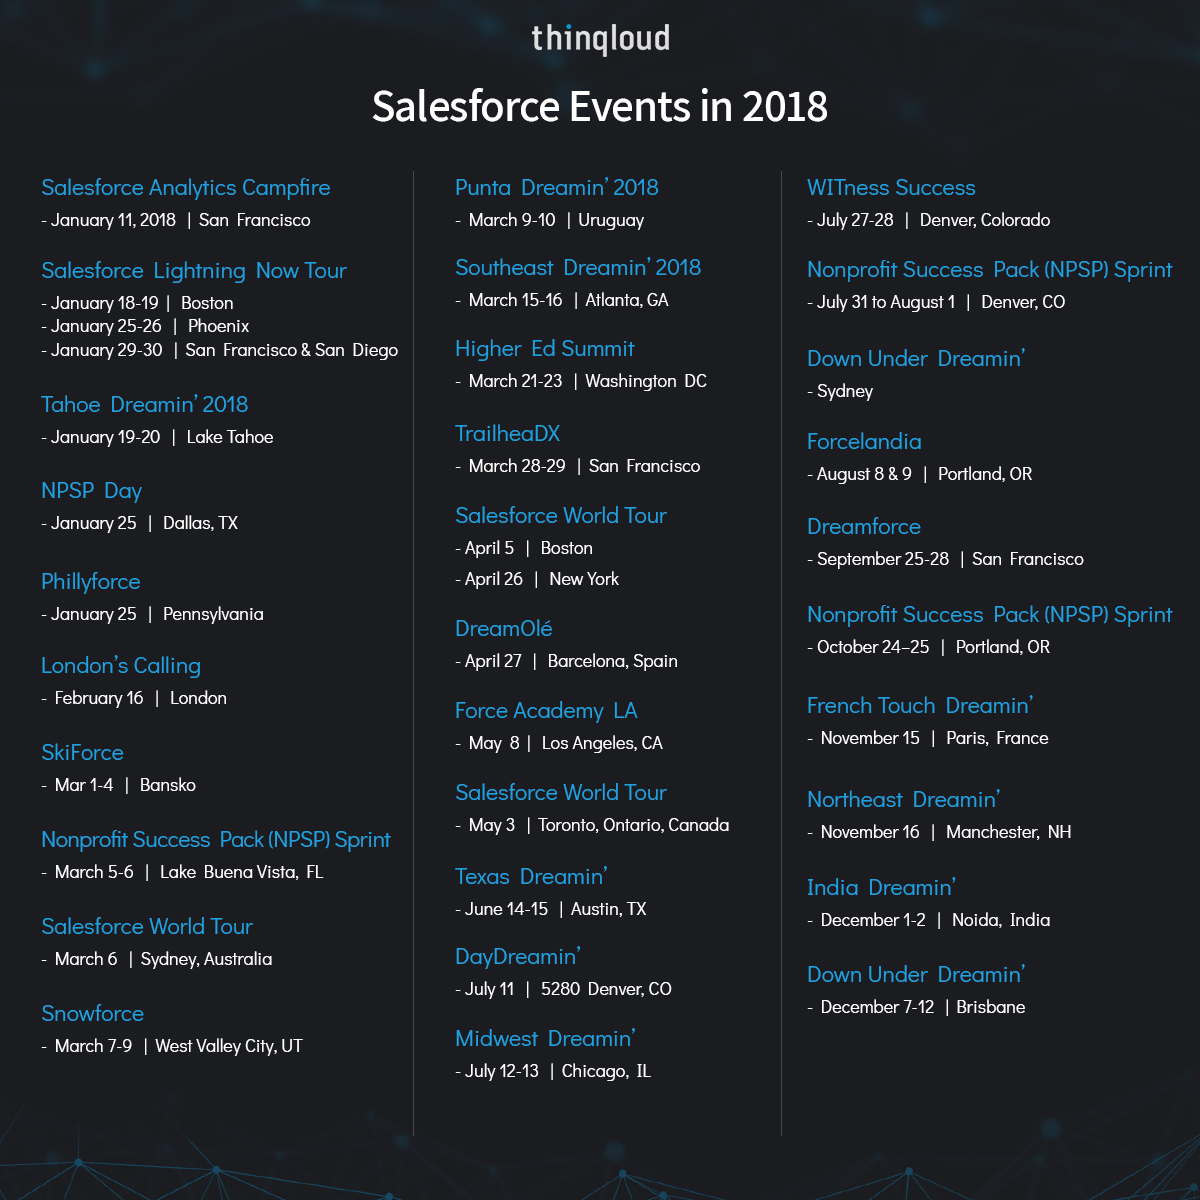 Salesforce-Events-in-2018 (1)